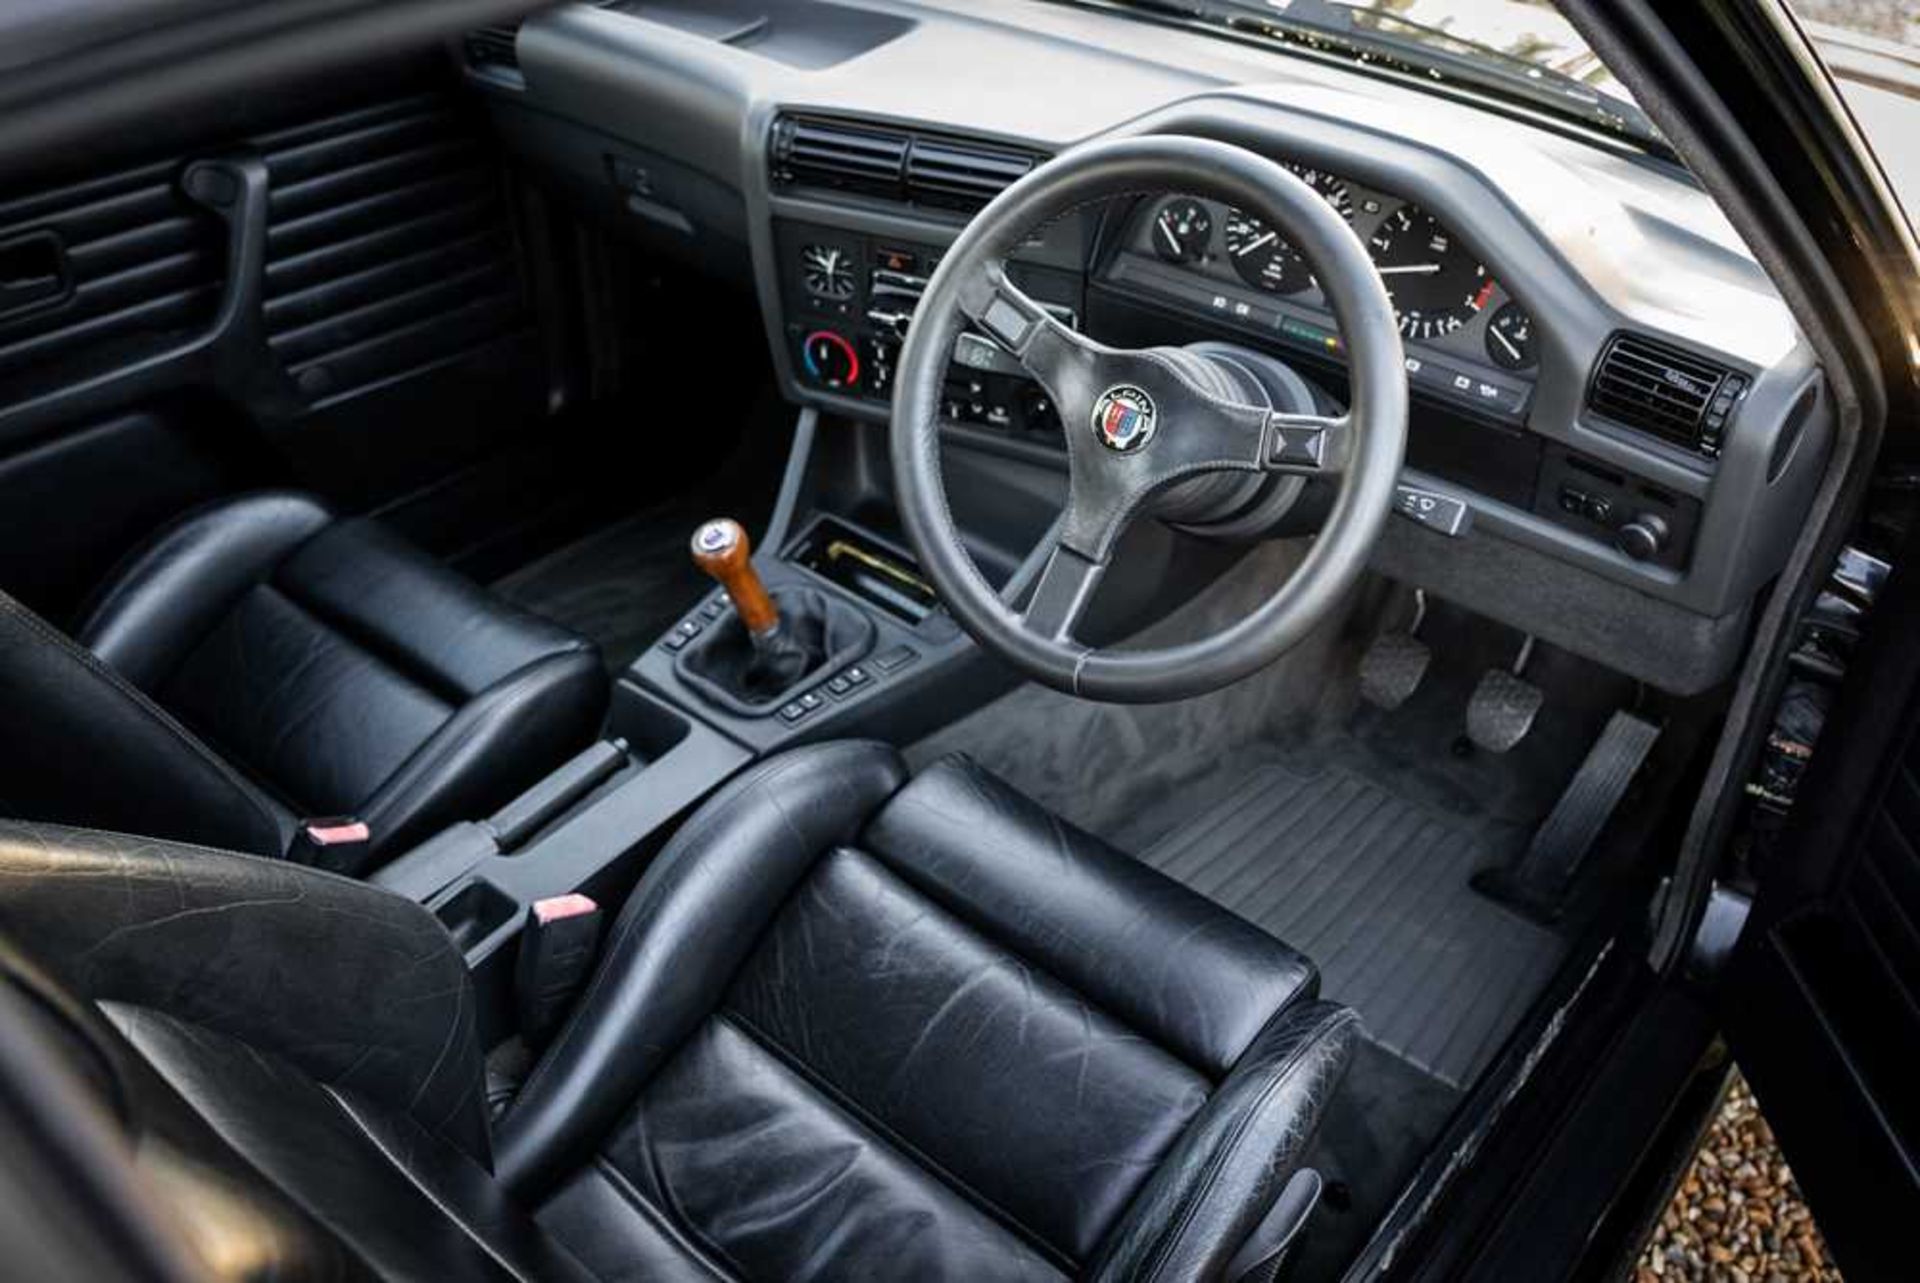 1989 BMW 320i Convertible Converted to Alpina 328i Specification - Image 32 of 51